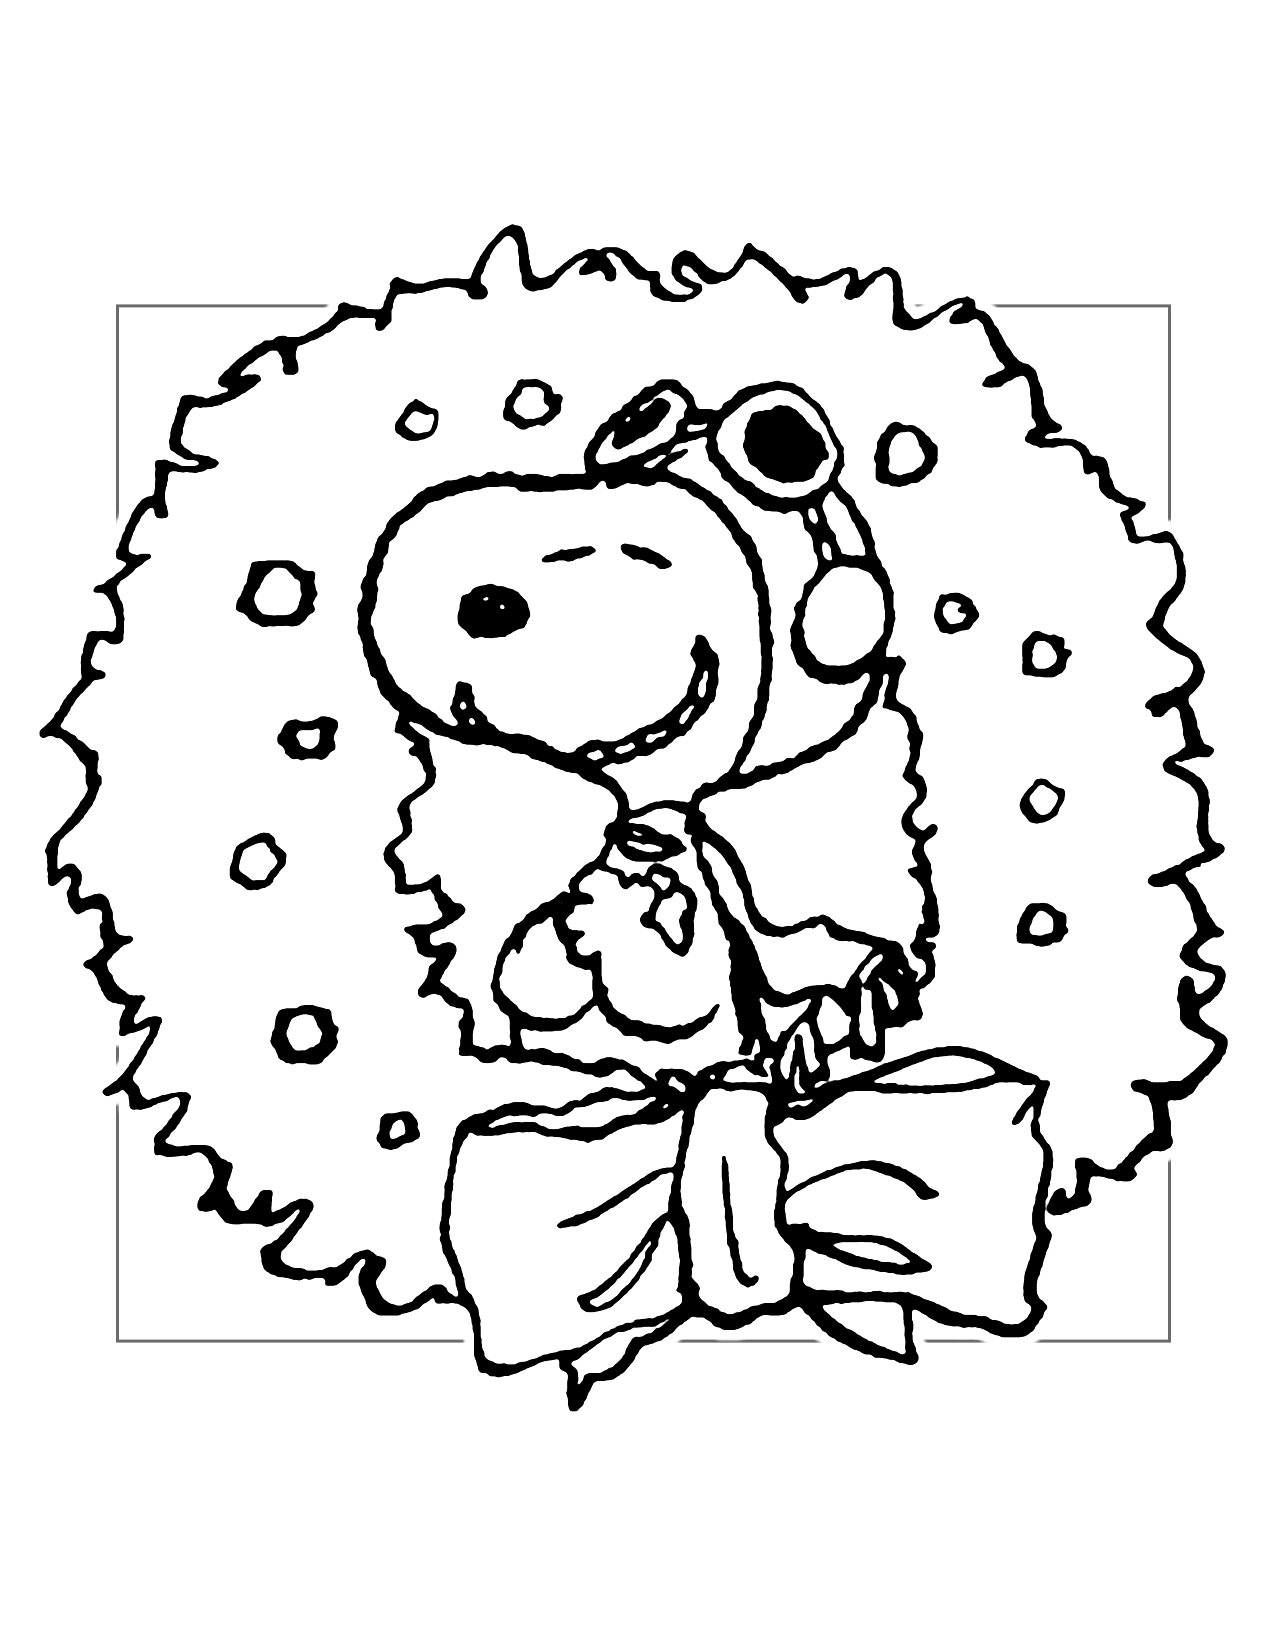 Snoop In A Christmas Wreath Coloring Page